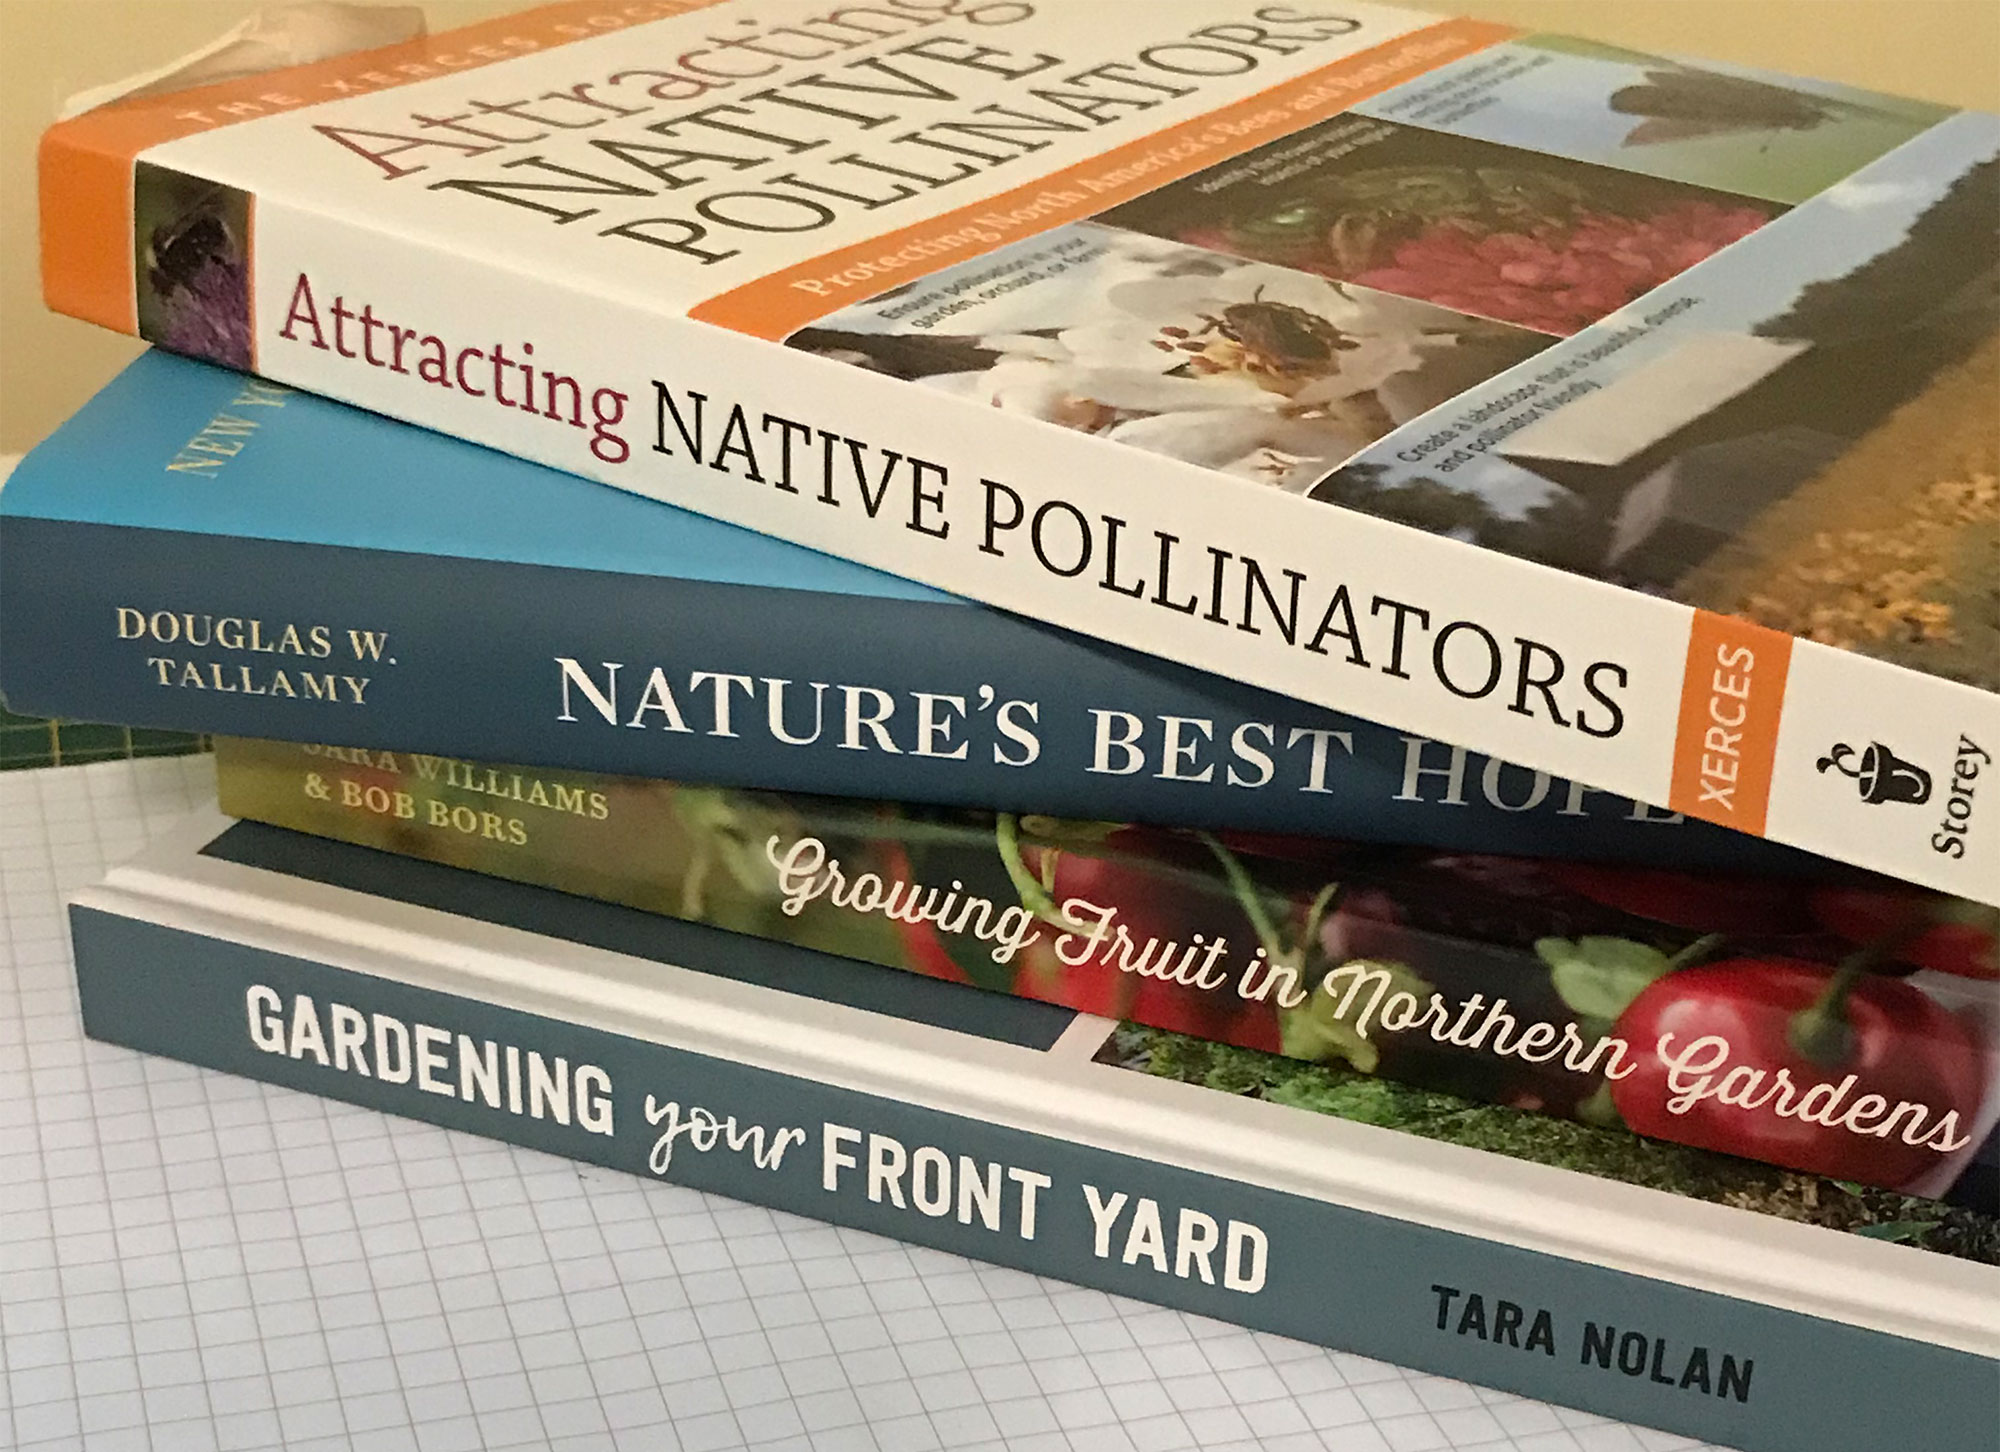 Stack of gardening books on graph paper.